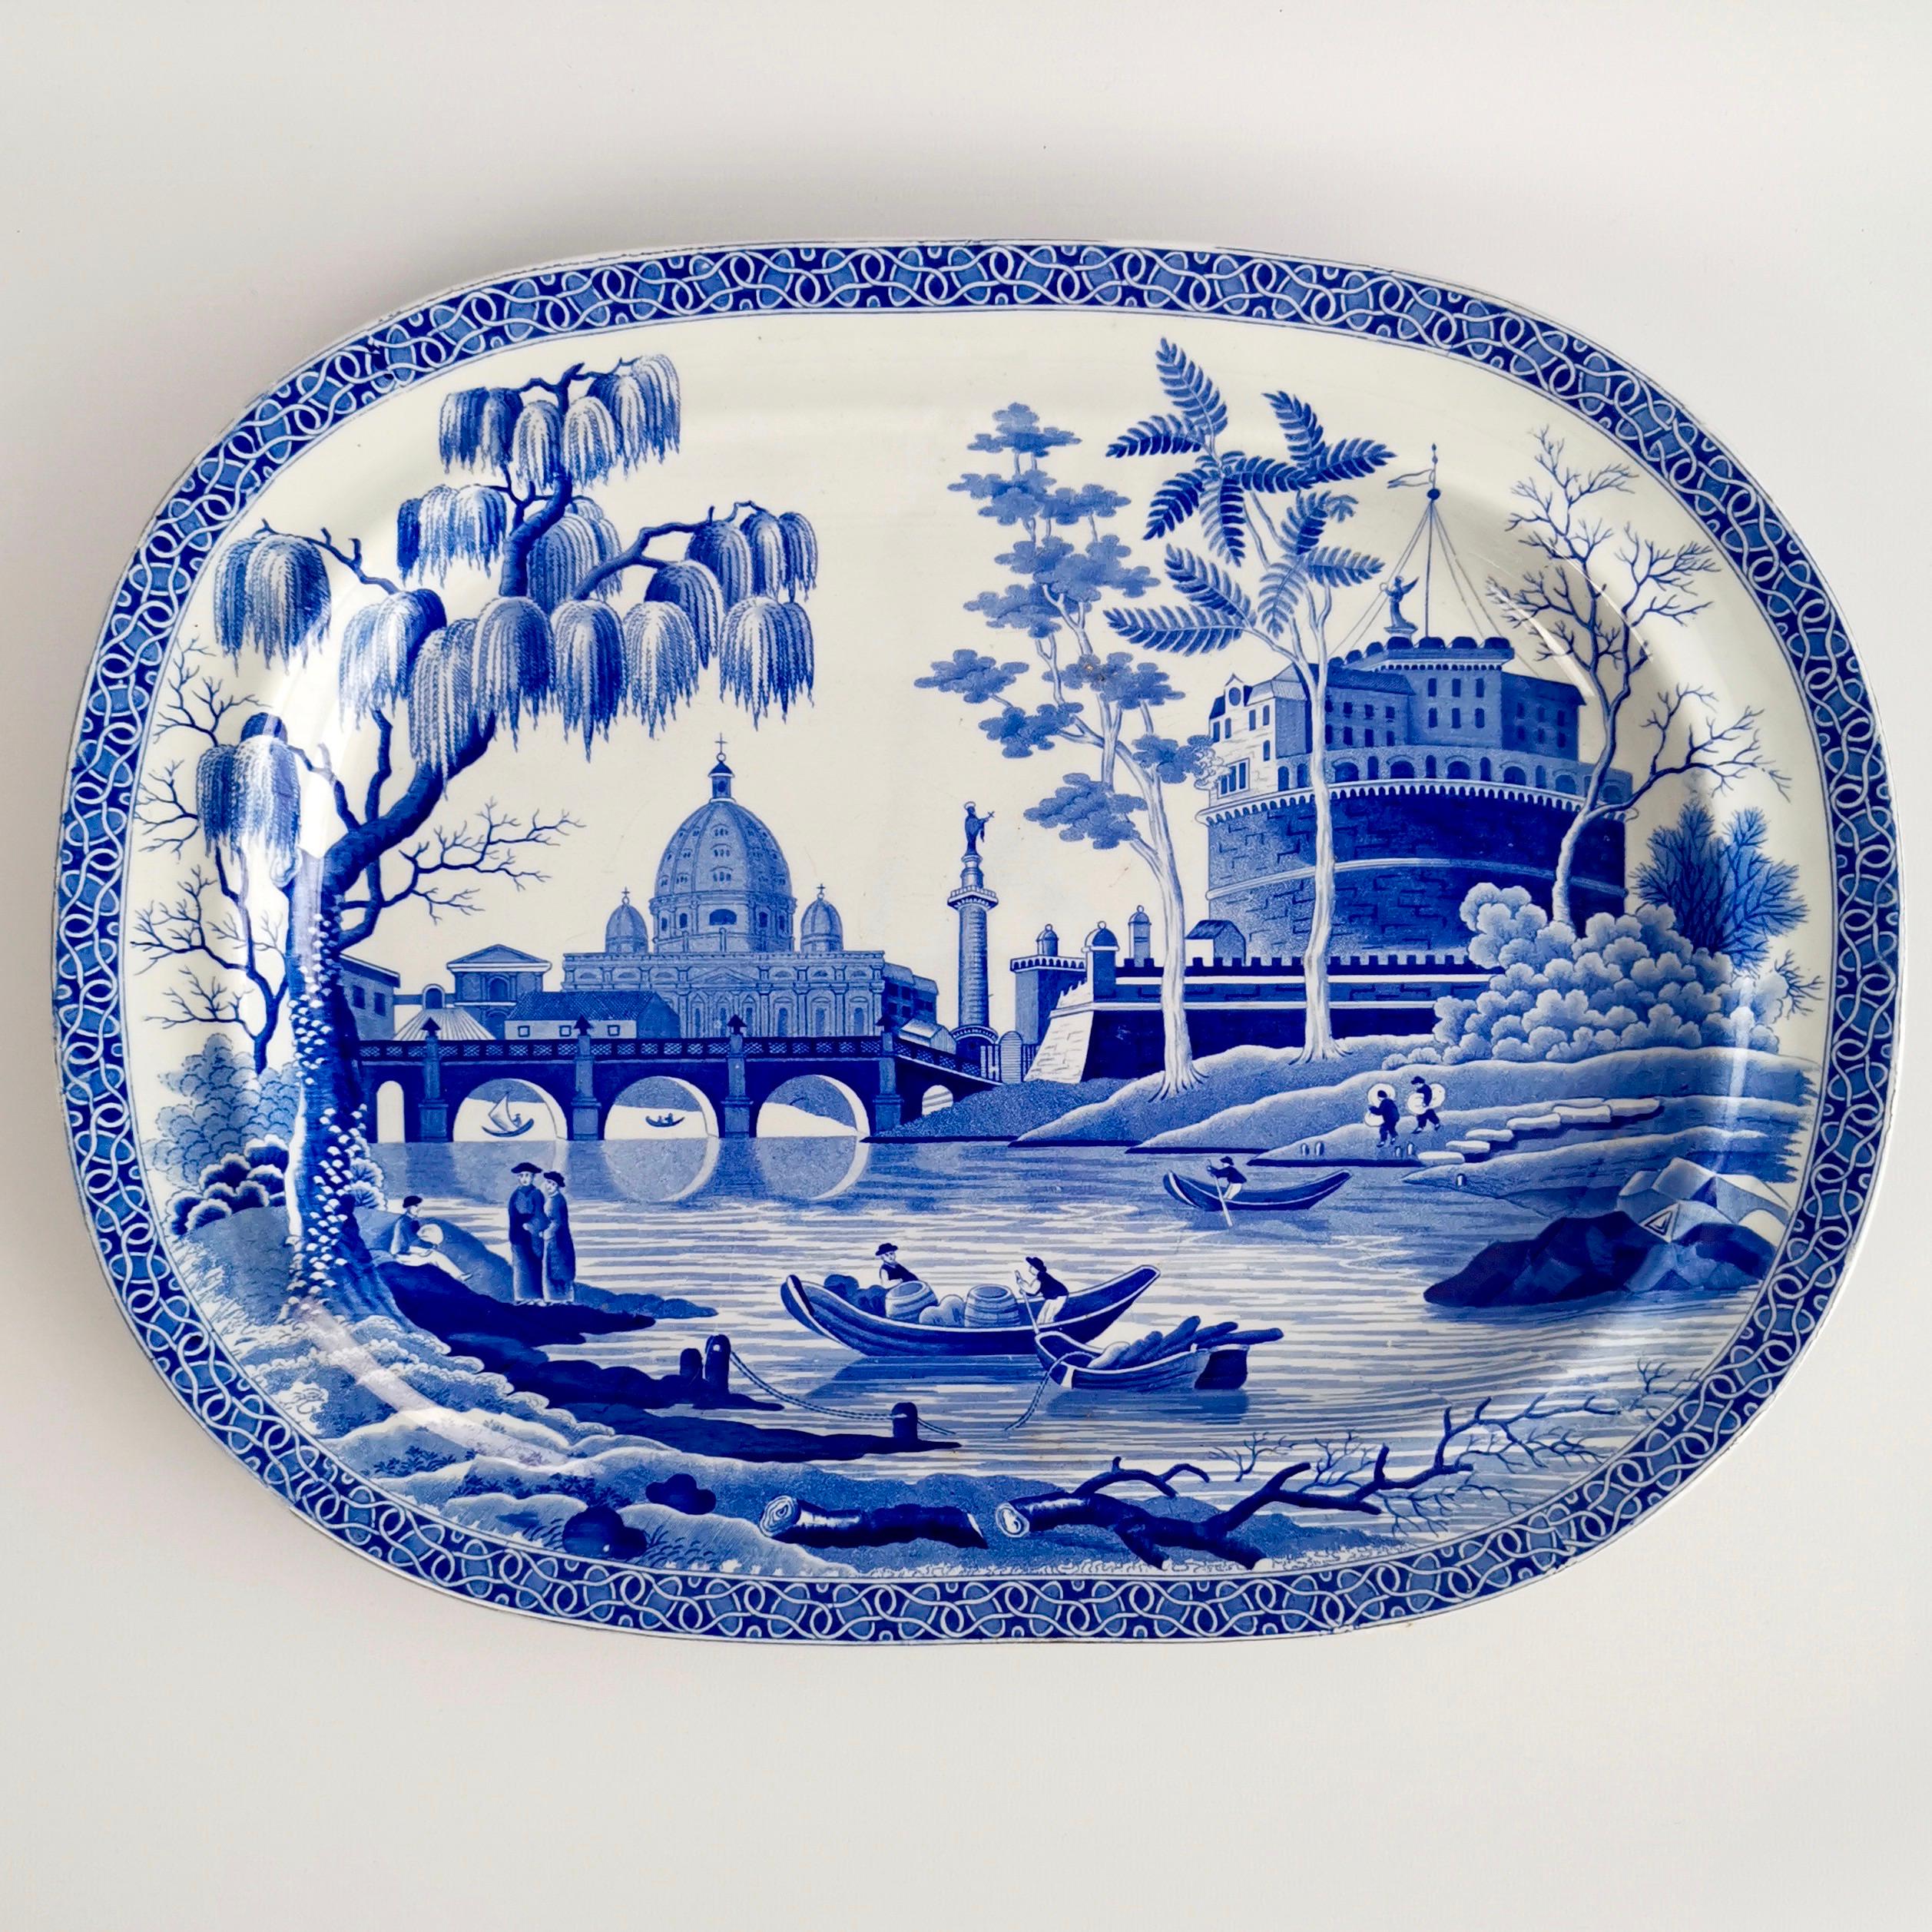 This is a beautiful meat platter with drainer made by Spode between 1811 and 1833. The items are made of pearlware and in immaculate condition. They are decorated with a superbly executed blue and white 